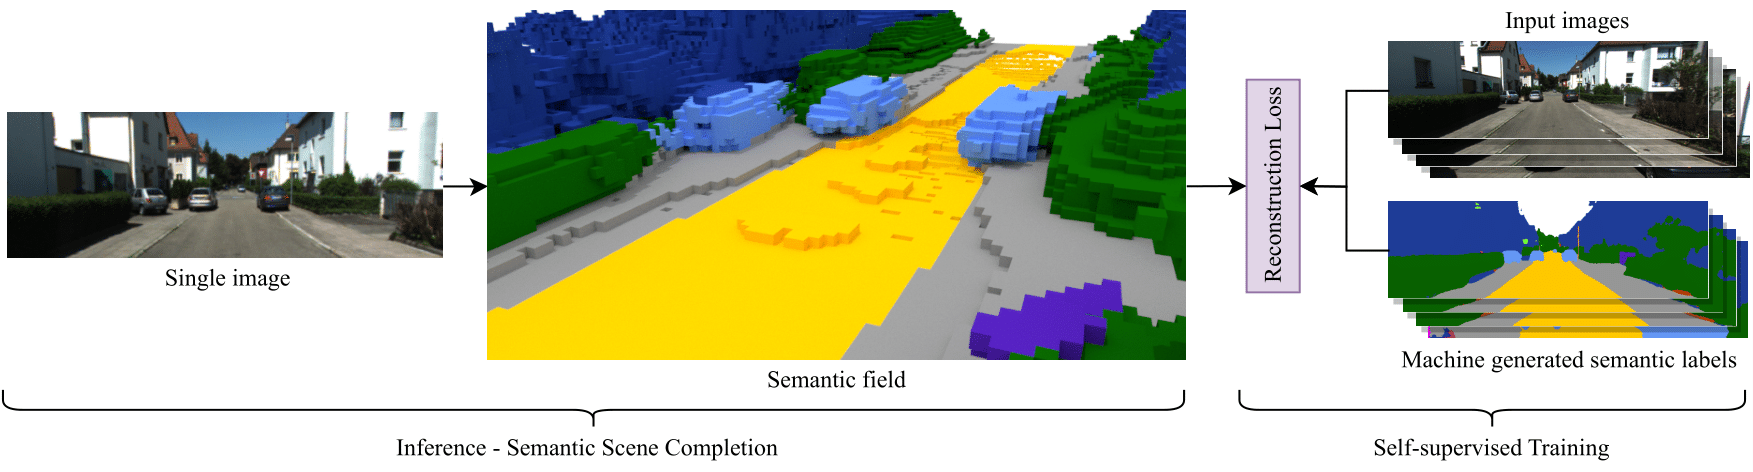 S4C: Self-Supervised Semantic Scene Completion with Neural Fields